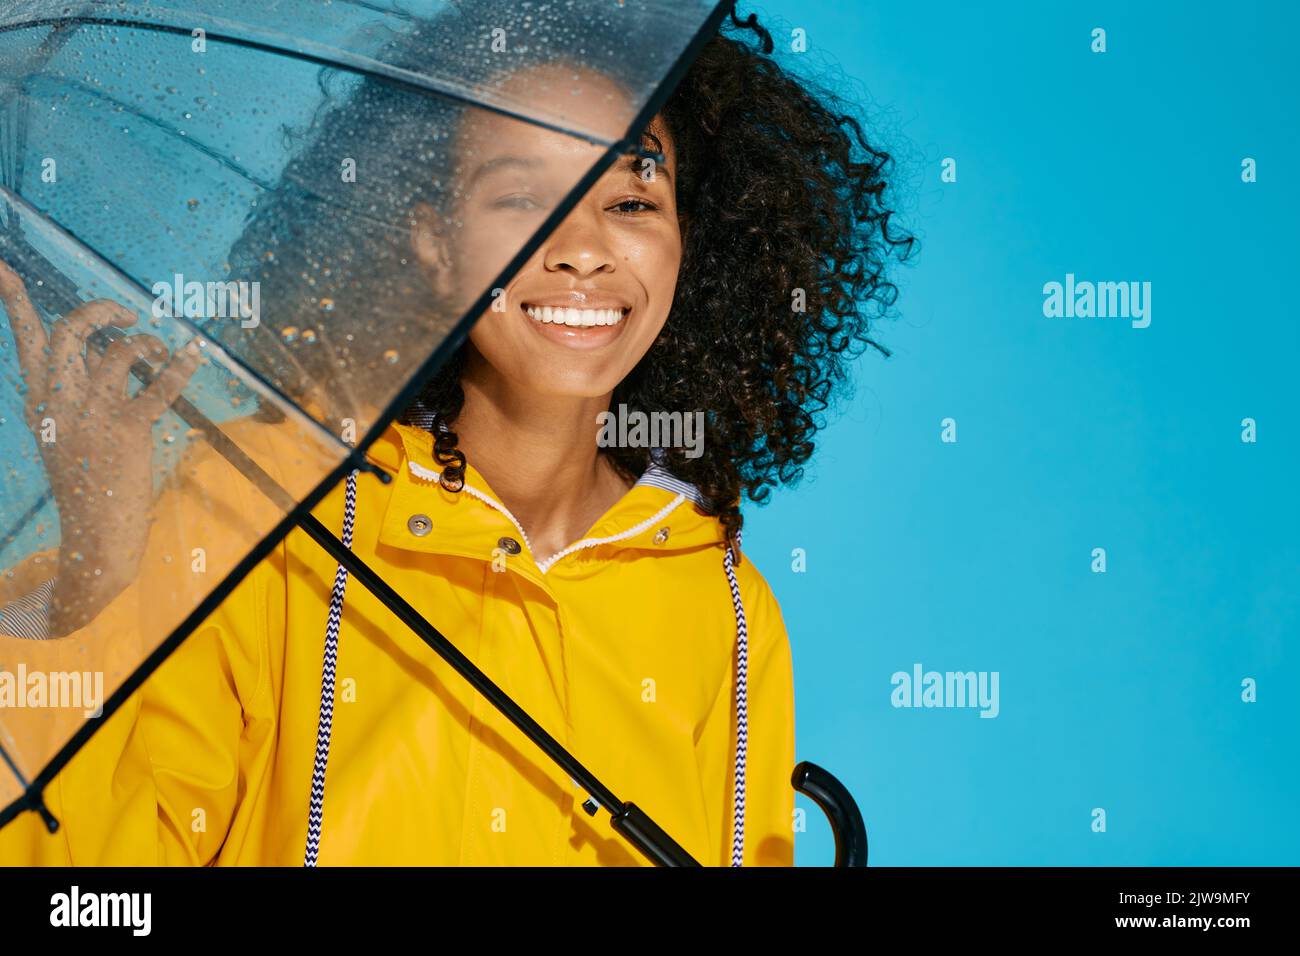 Portrait of smiling African woman with afro-hairstyle in yellow raincoat isolated over blue background with wet transparent umbrella Stock Photo